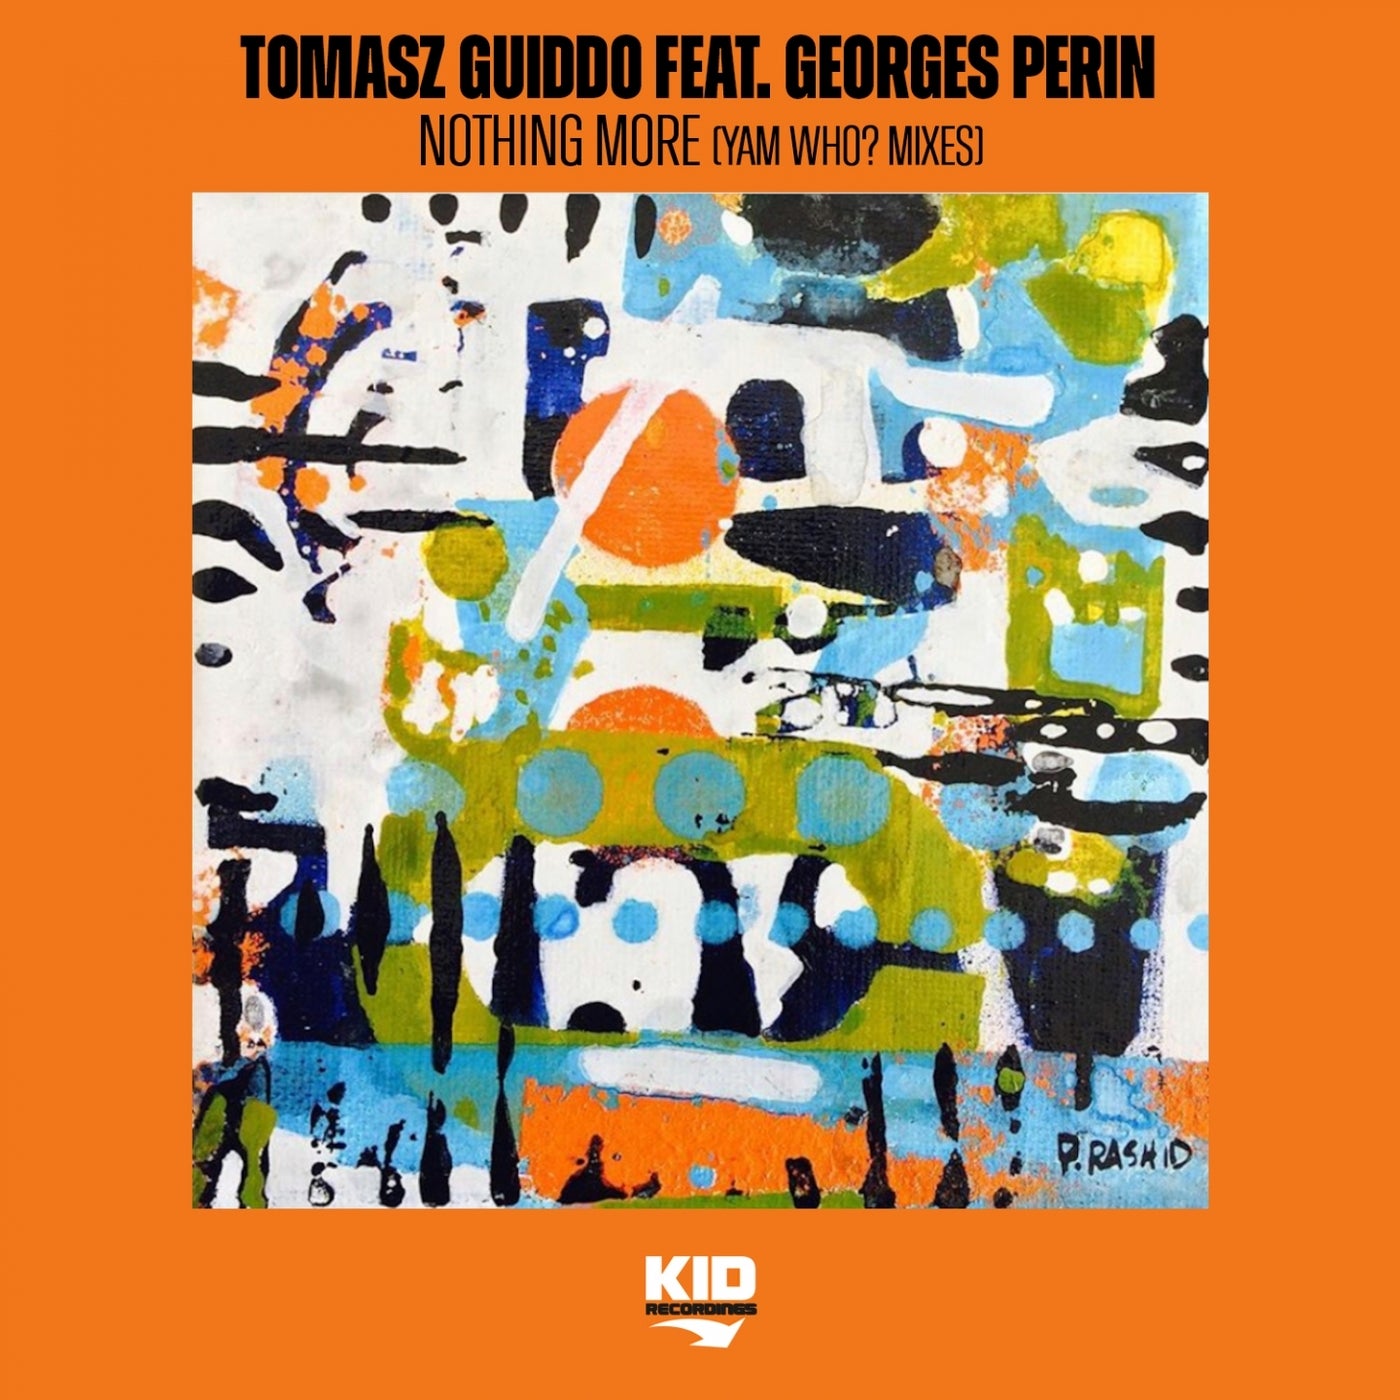 Tomasz Guiddo - Nothing More [Yam Who? Mixes] (feat. Georges Perin) [KIDD10127]